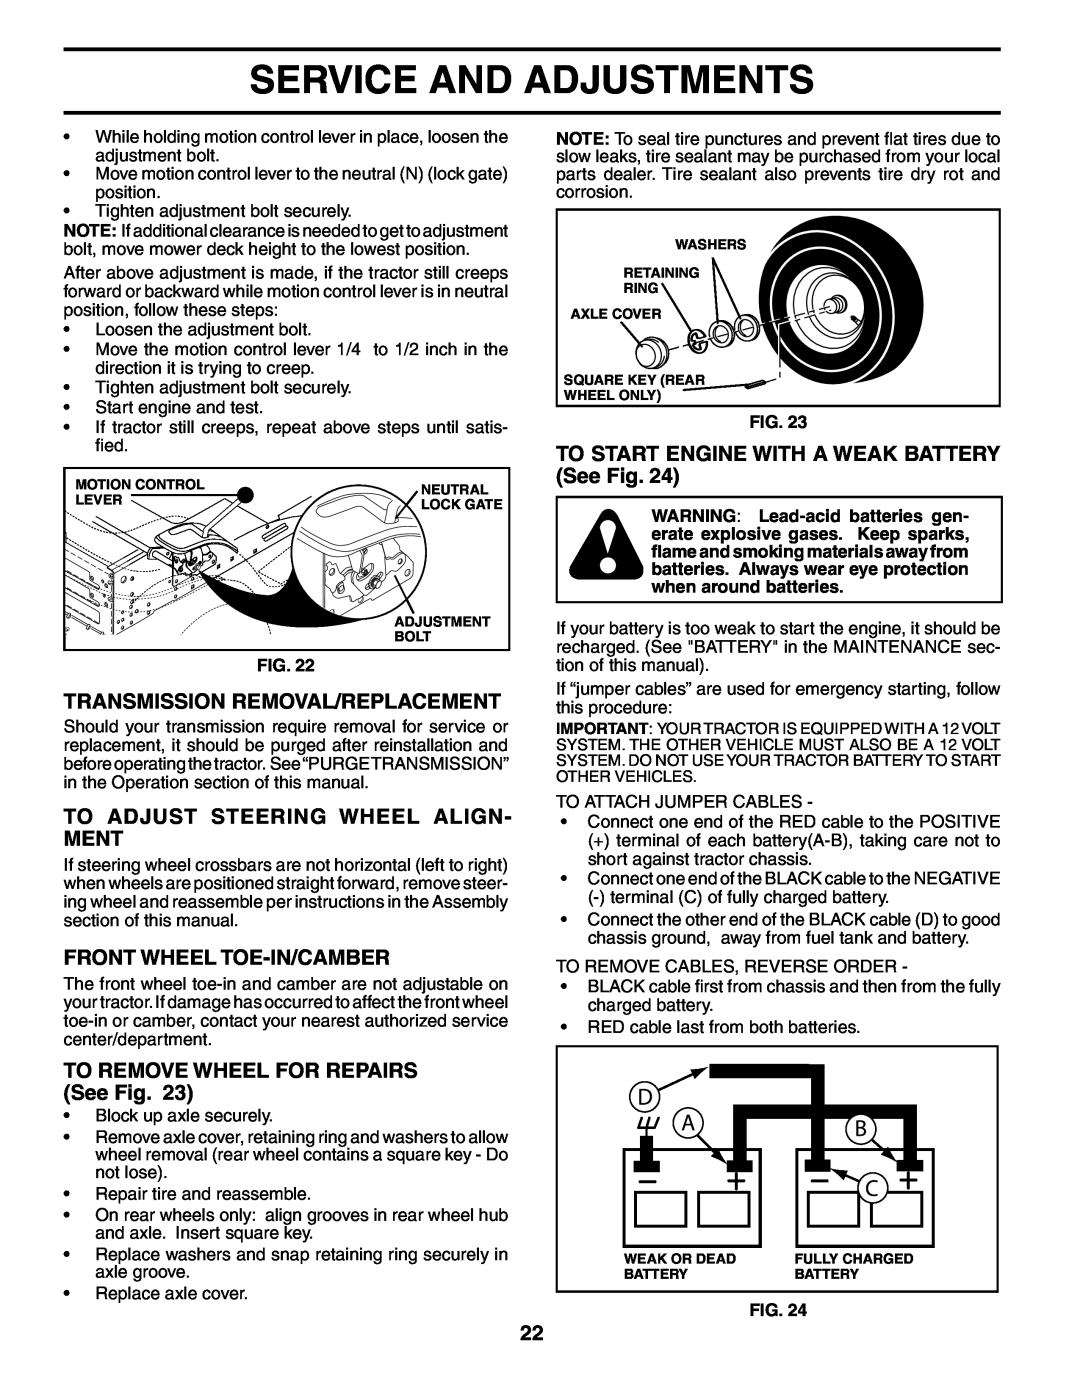 Poulan 195620 manual Transmission Removal/Replacement, To Adjust Steering Wheel Align- Ment, Front Wheel Toe-In/Camber 